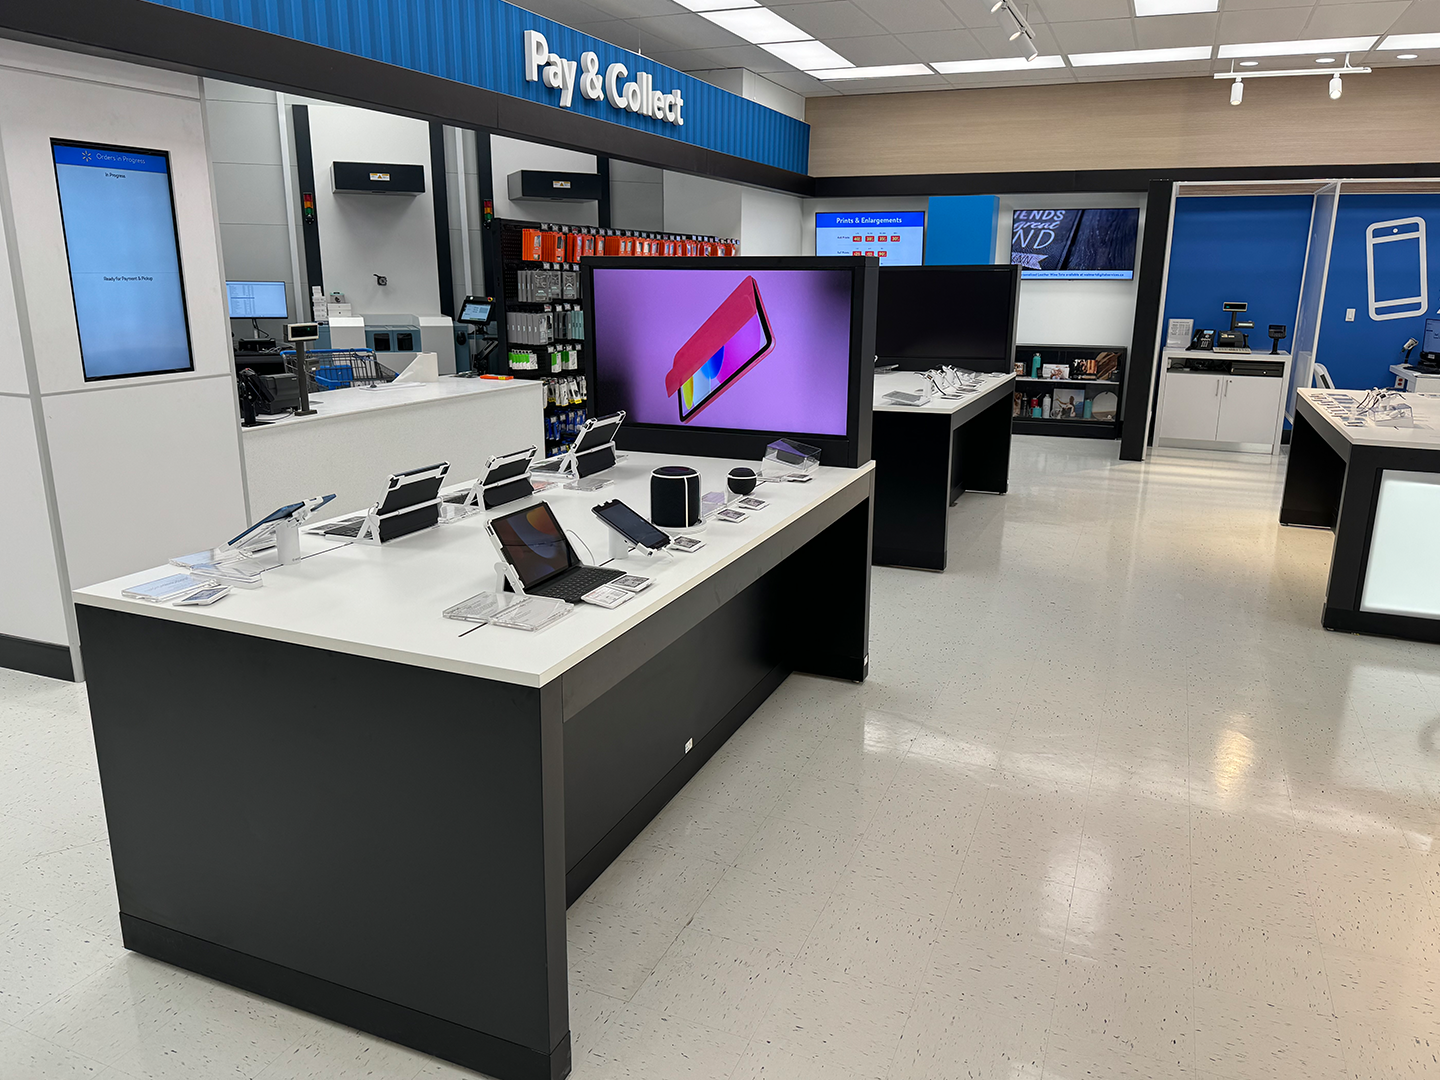 Side view of the custom electronic displays at Walmart, highlighting product arrangement